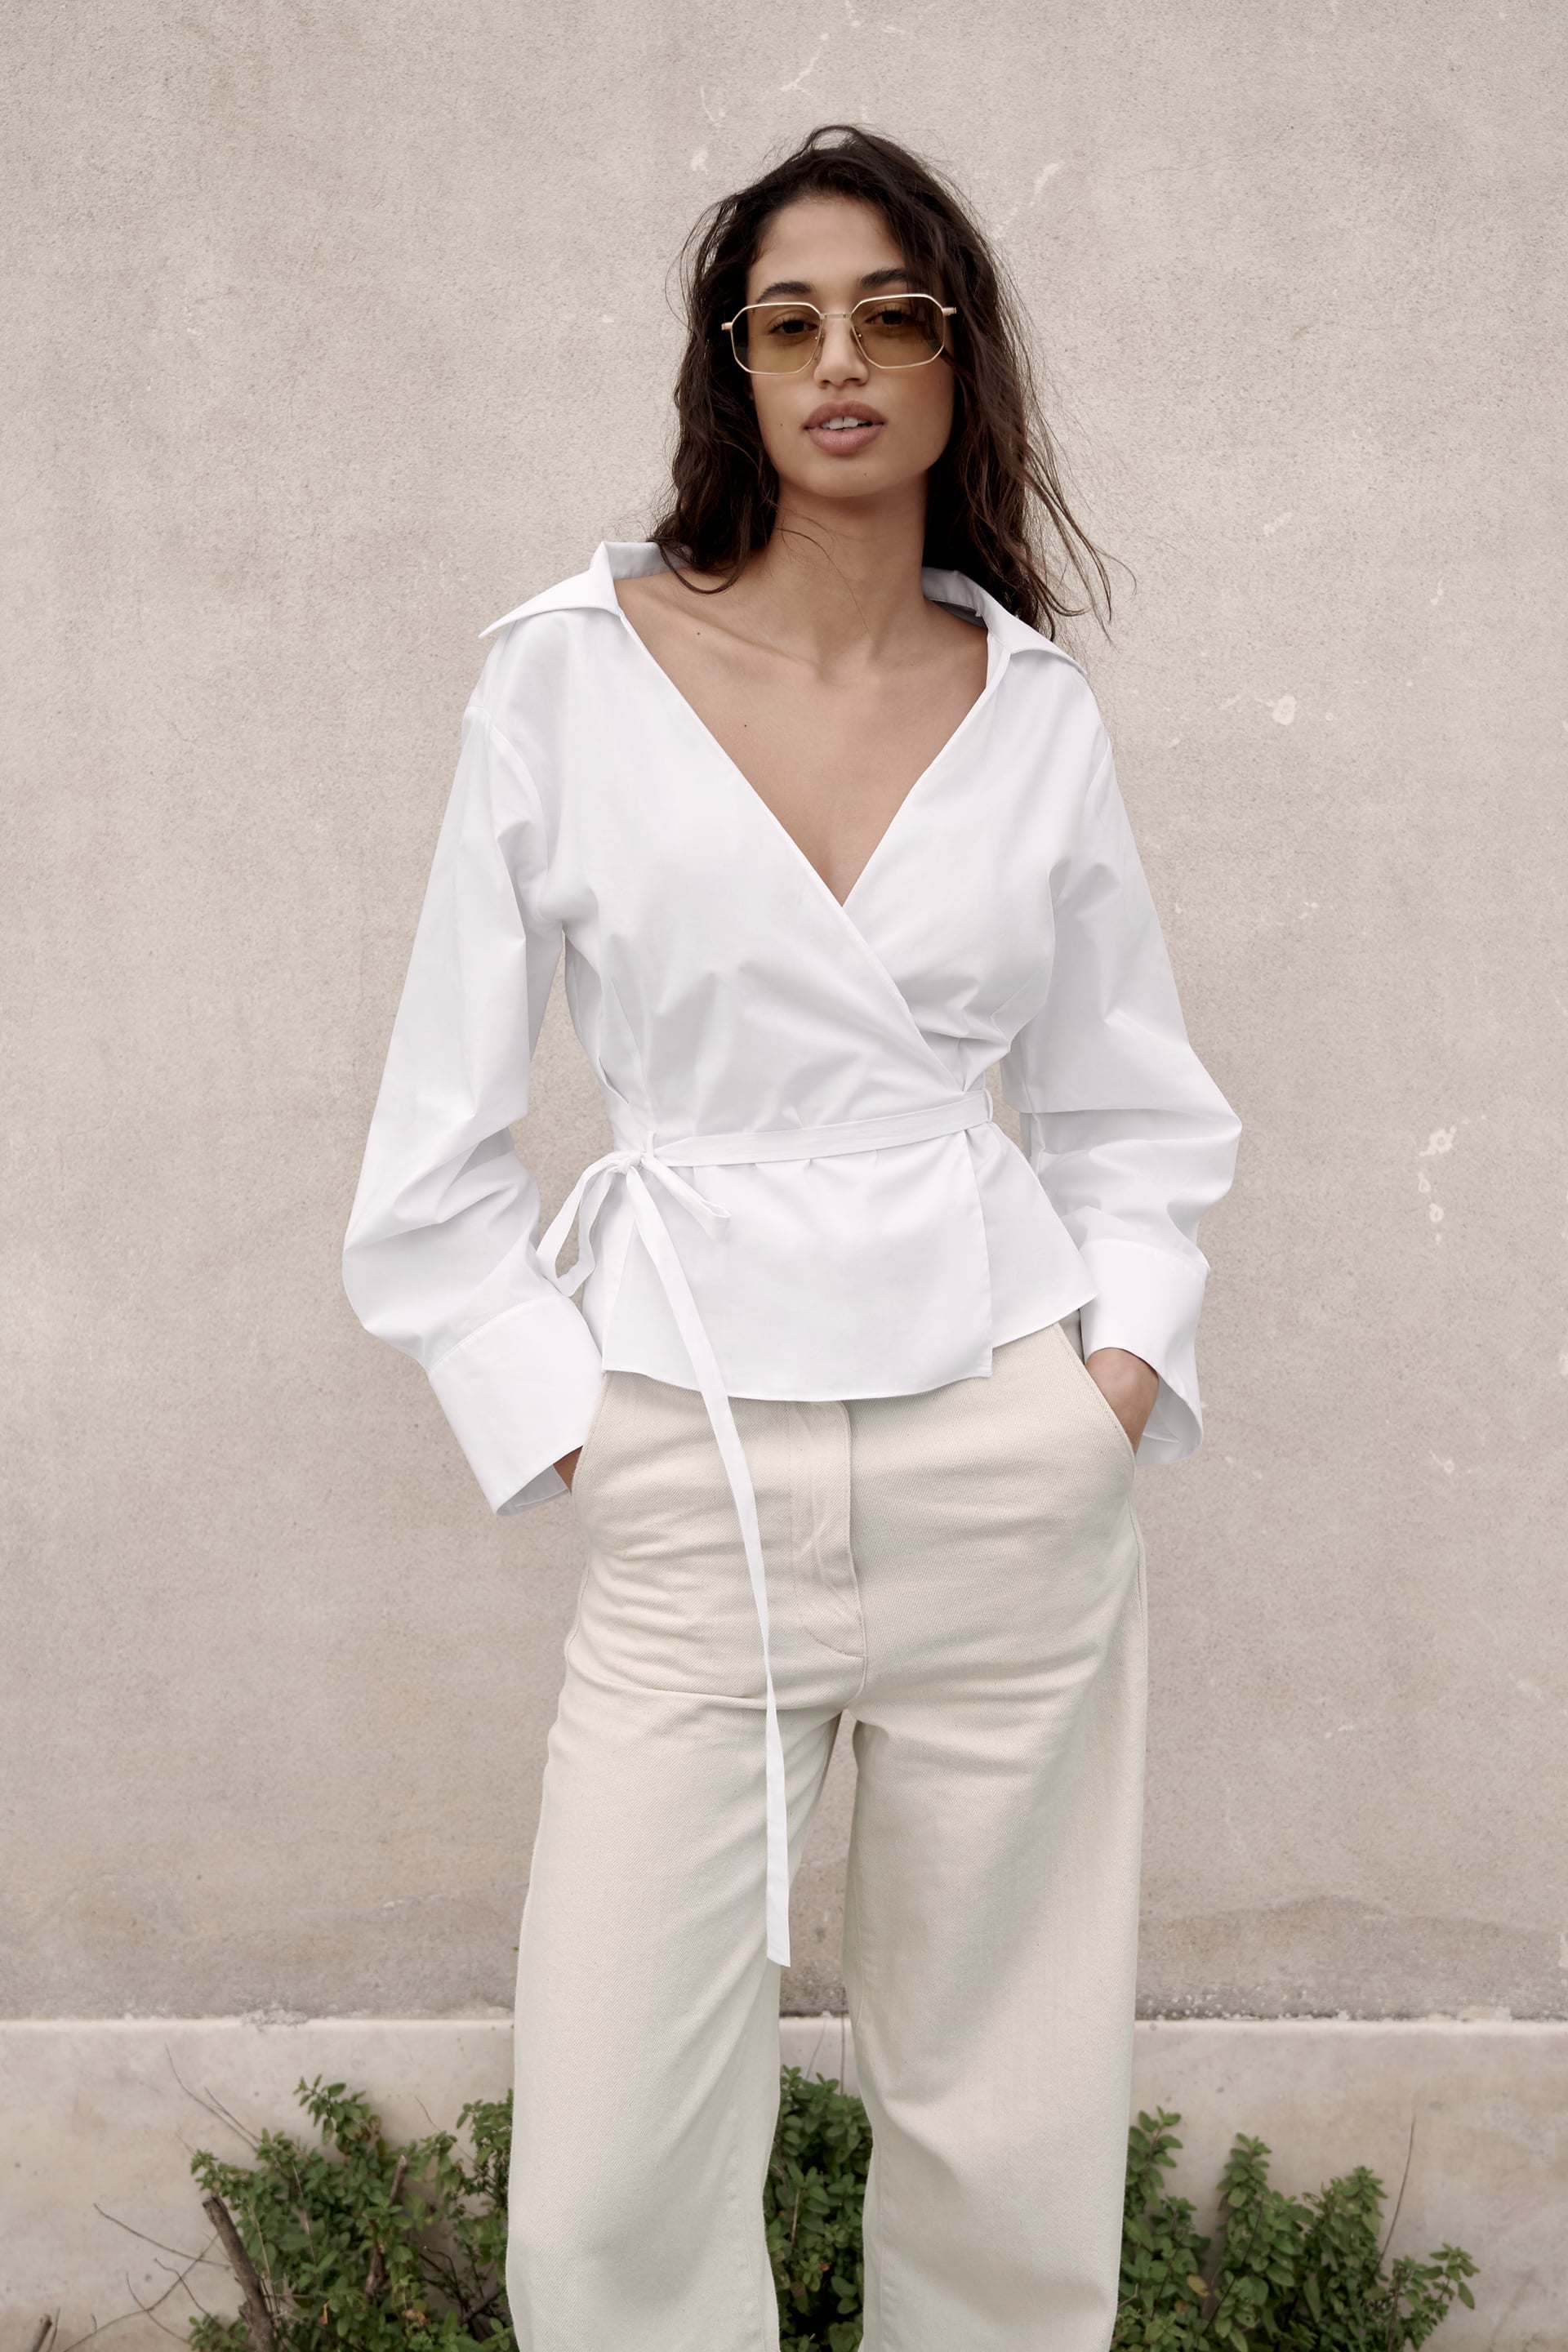 Best New Spring Clothes From Zara, March 2021